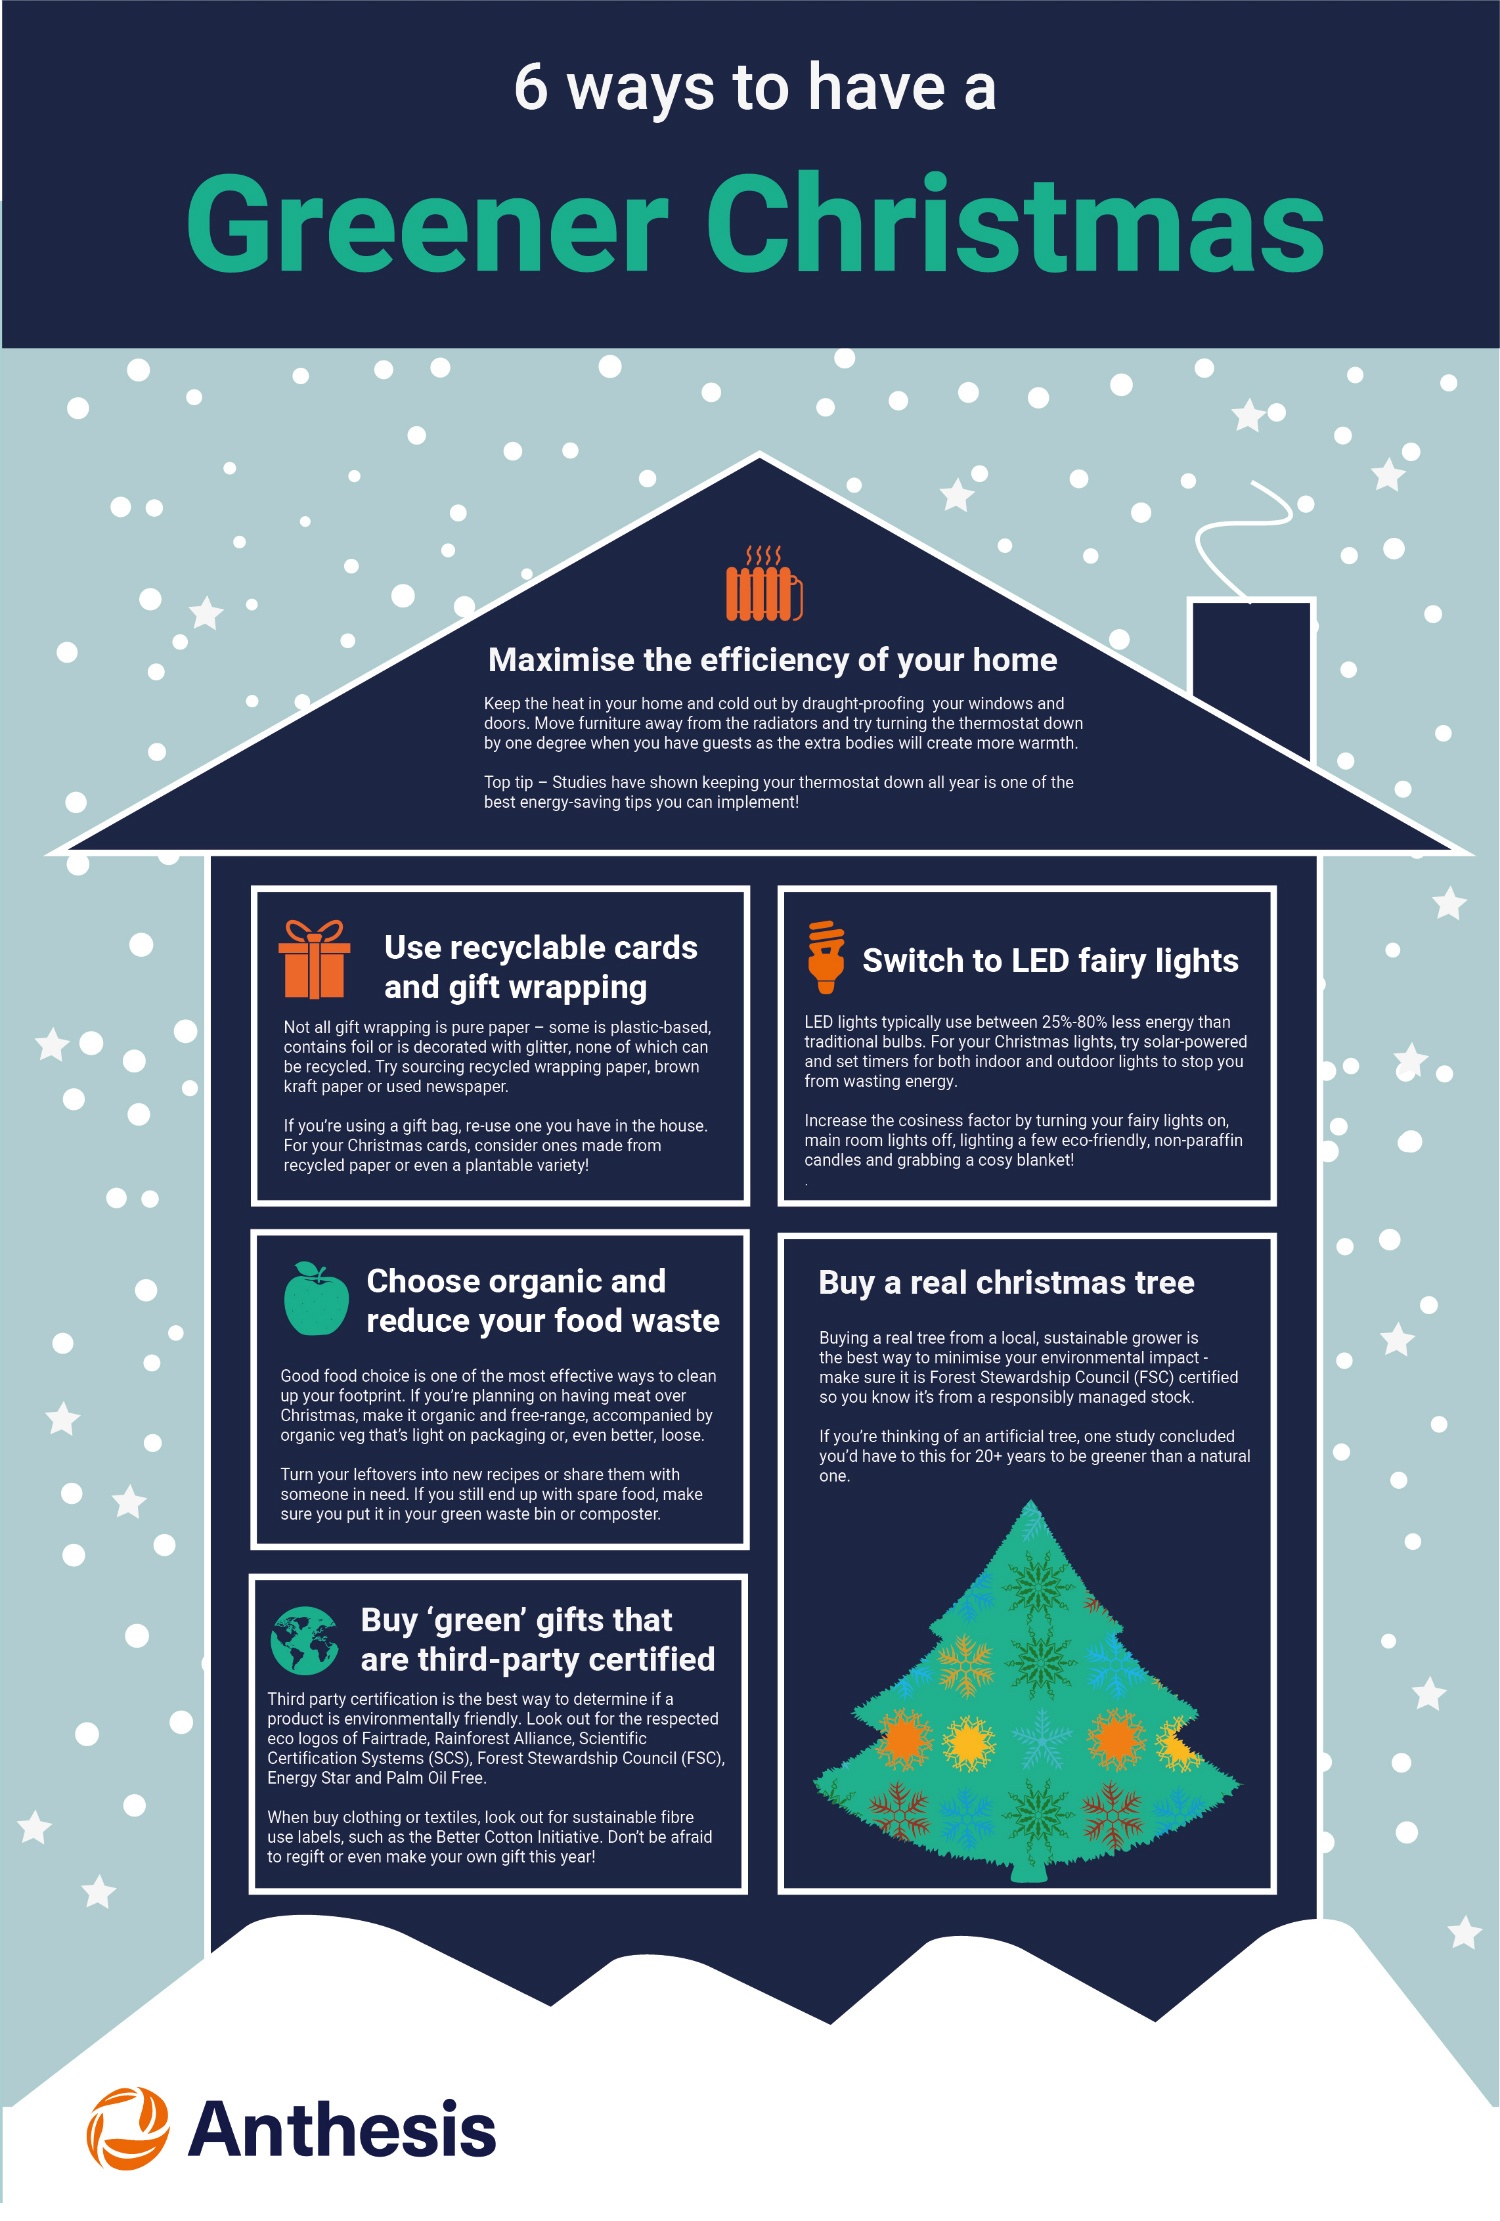 6 ways to have a Greener Christmas infographic - Anthesis